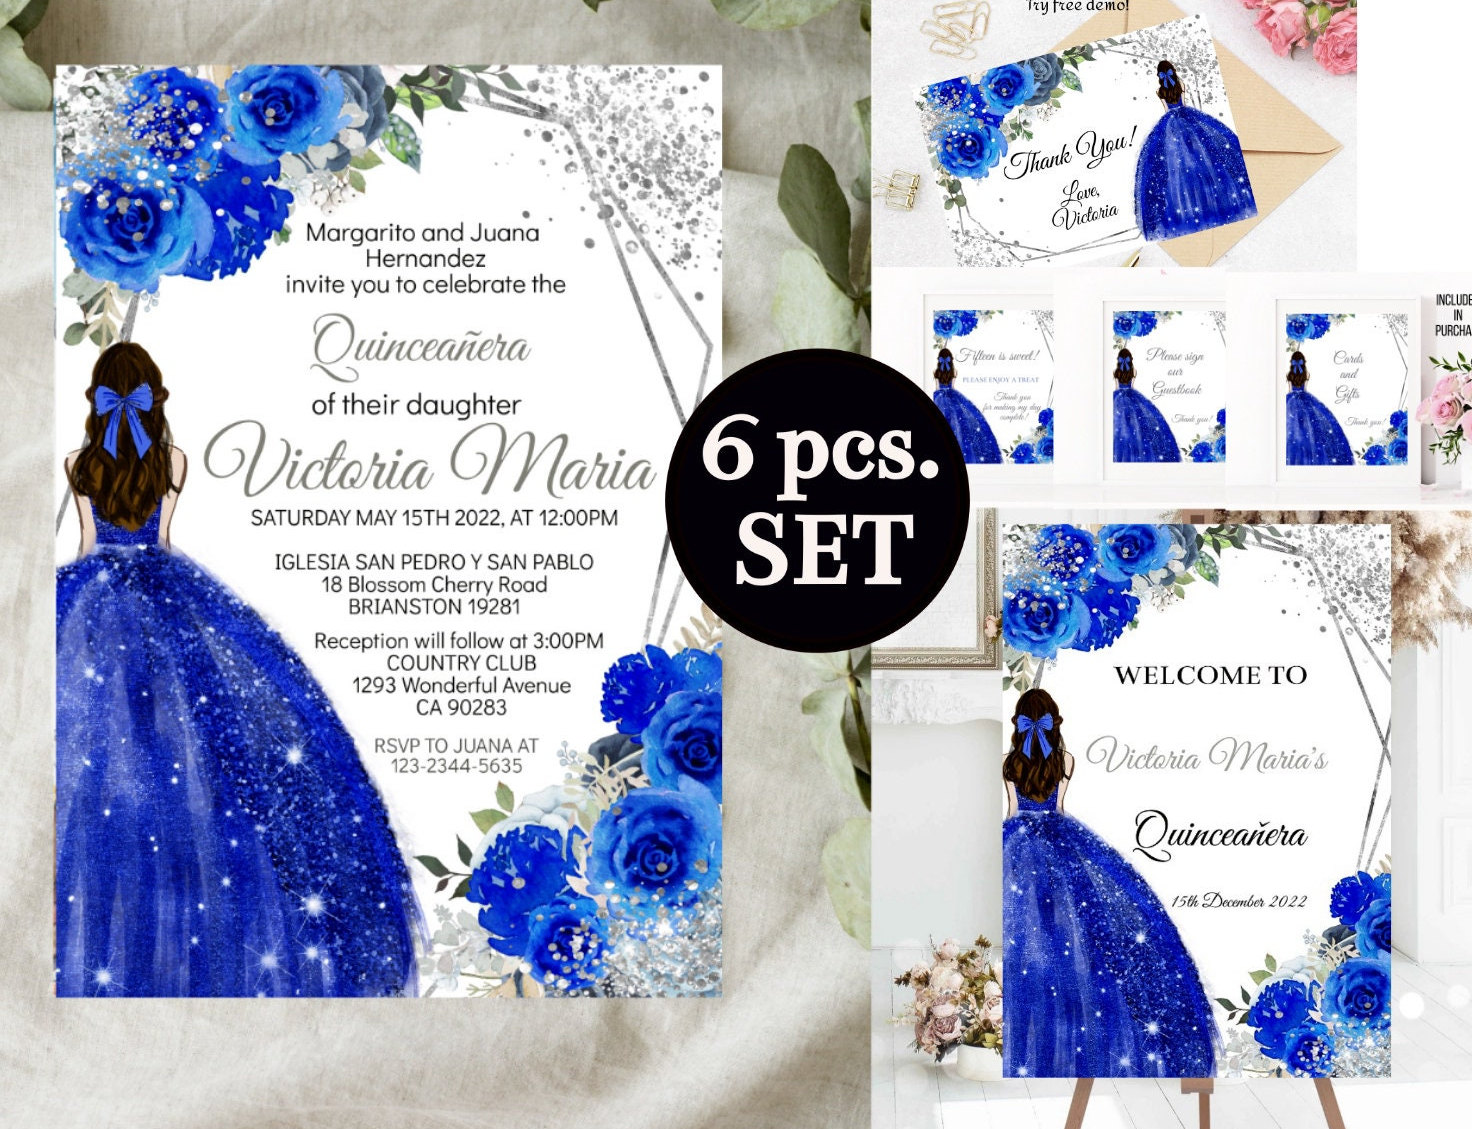 Navy Quinceanera Invitations, Gold and Blue Glitter Quinceanera Invitations,  Navy Blue Quinceanera Invitations, Printable Quince Invitations 